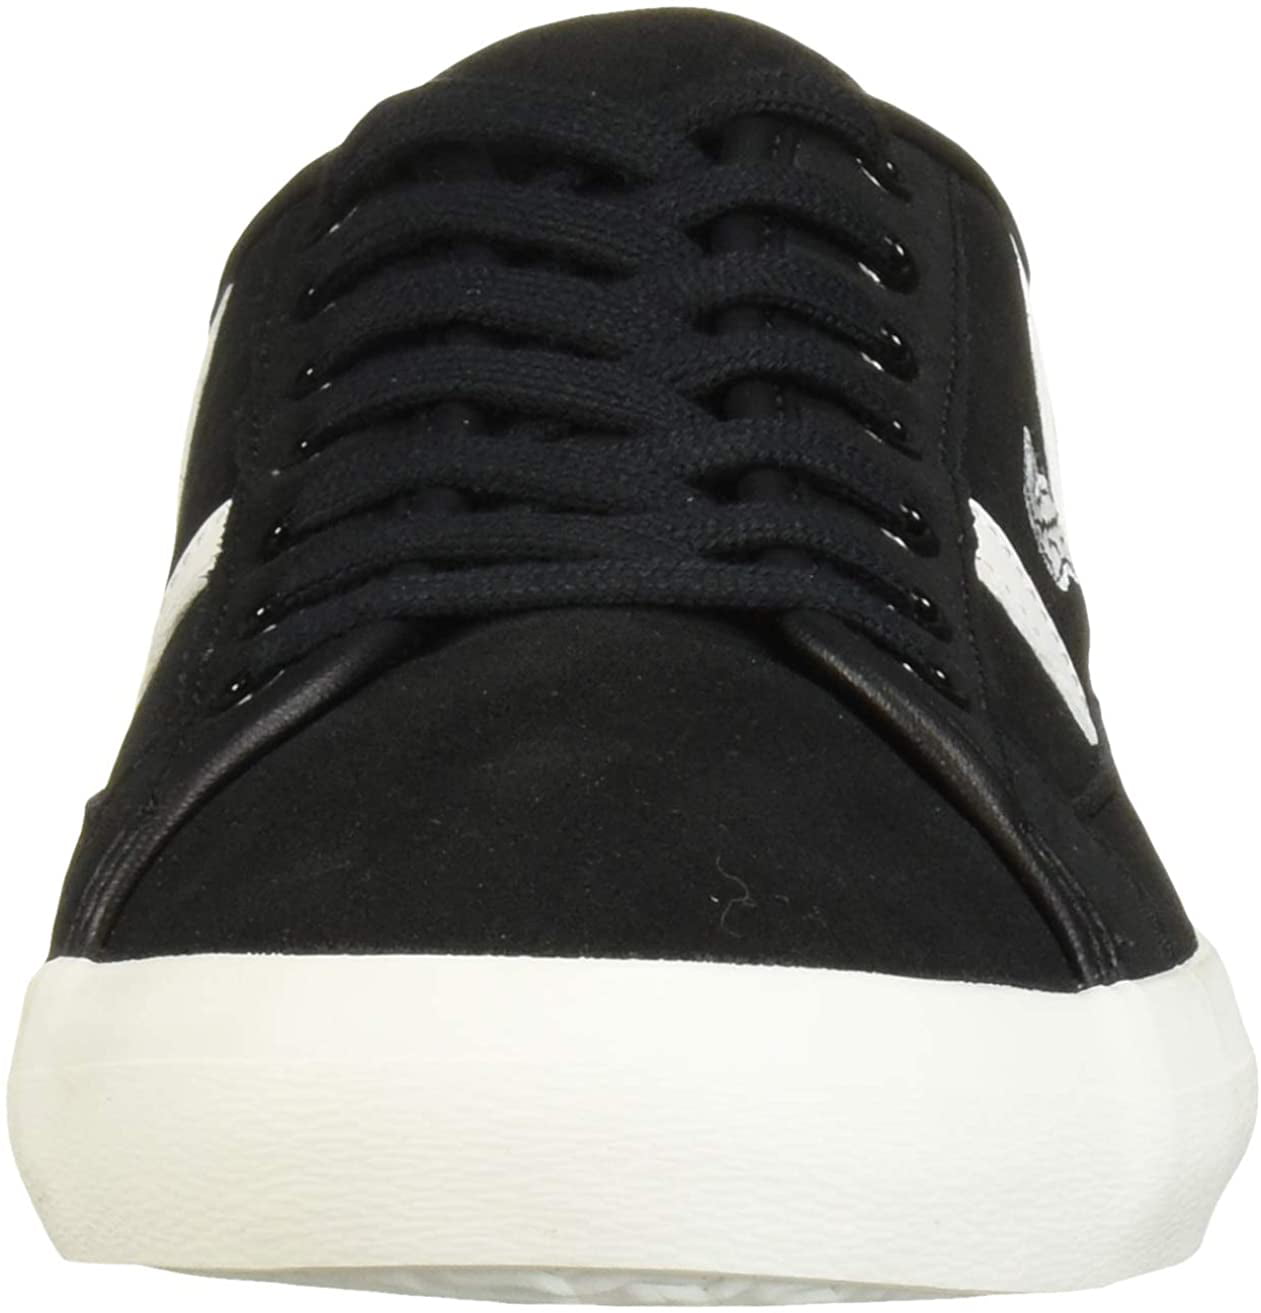 Lacoste Sideline 319 3 CMA 7-38CMA0052454 Mens Black Low Top Sneakers Shoes 